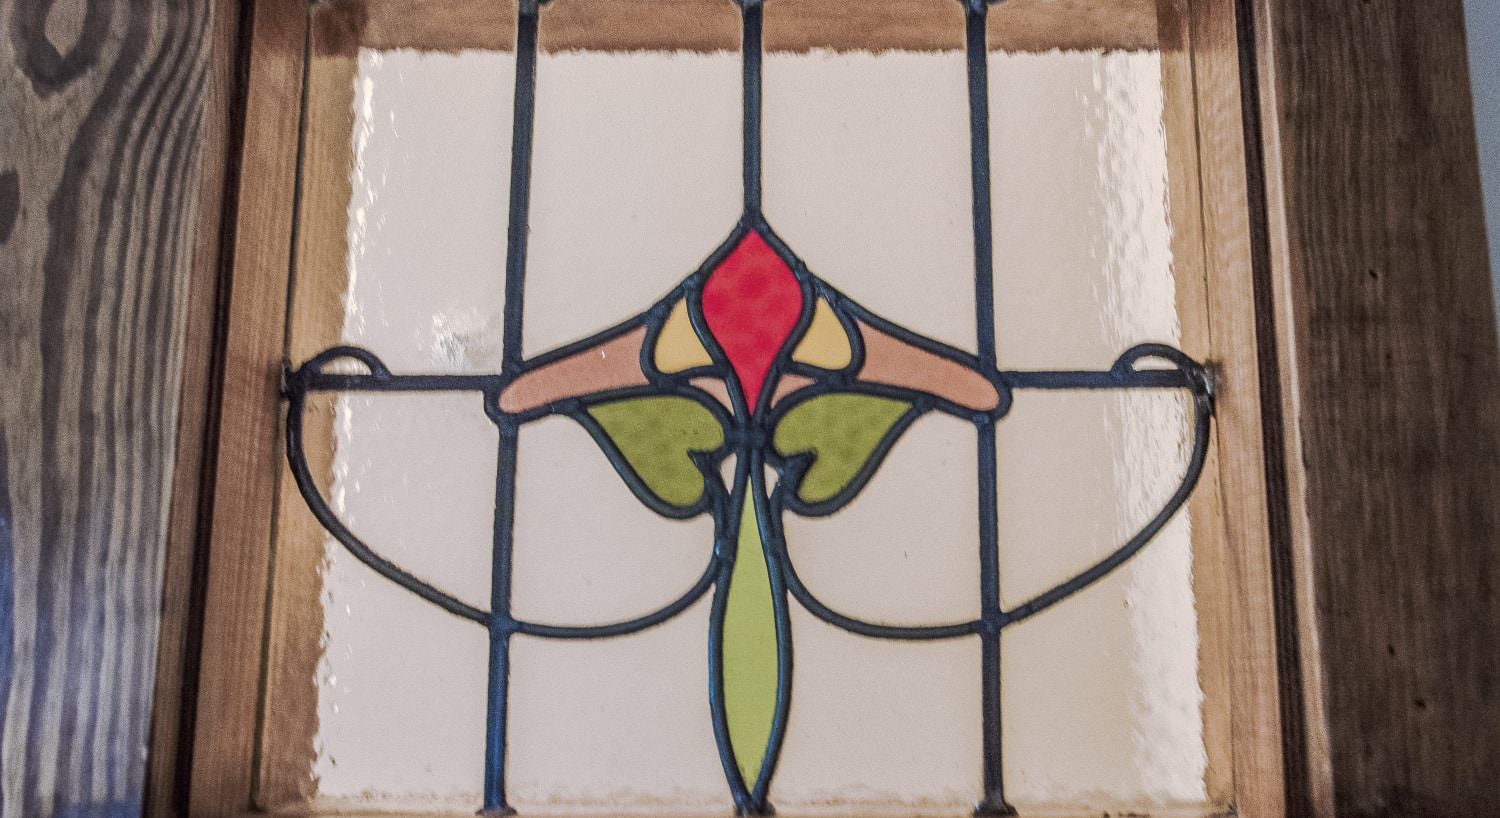 Wooden door with stained glass insert of a red, yellow, and pink flower with green stem